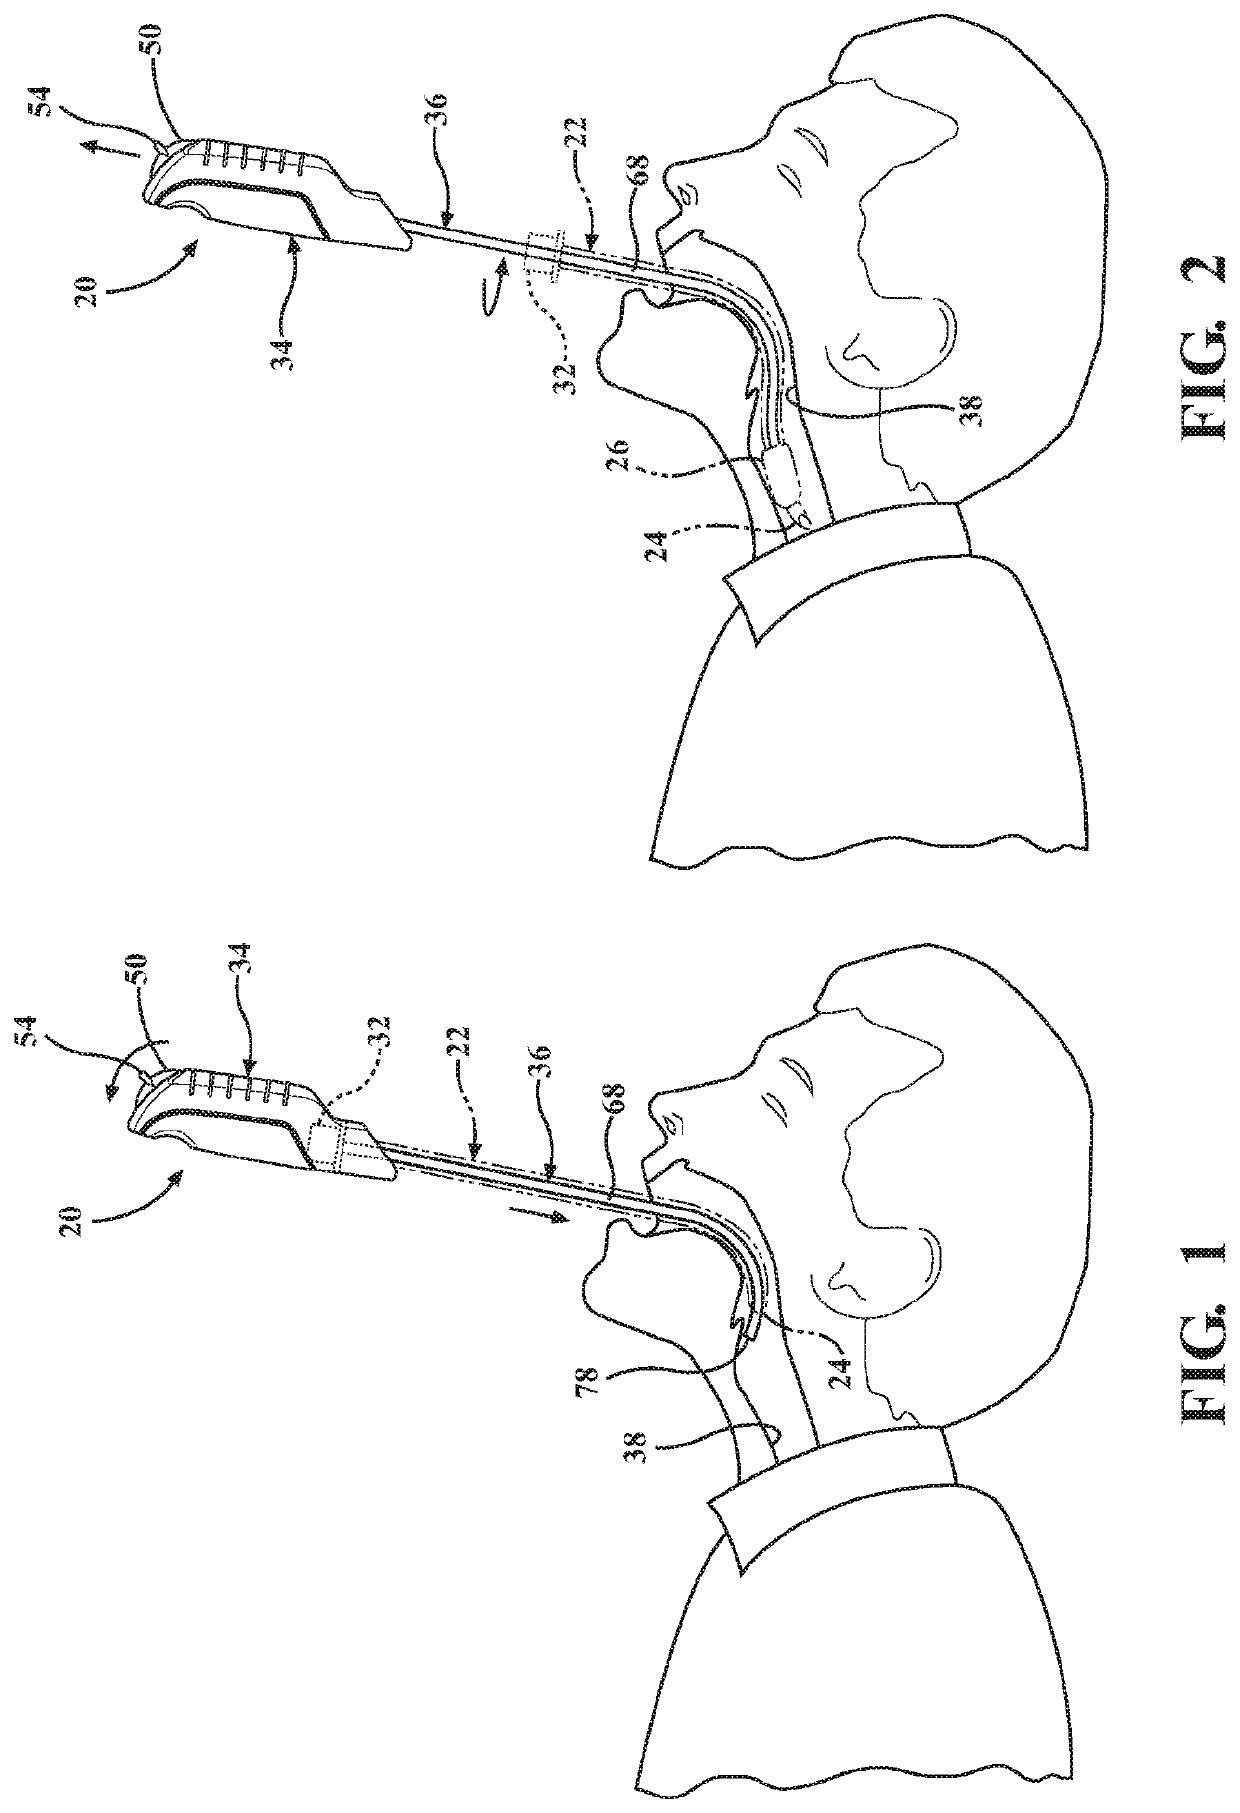 Intubation stylet with video feed